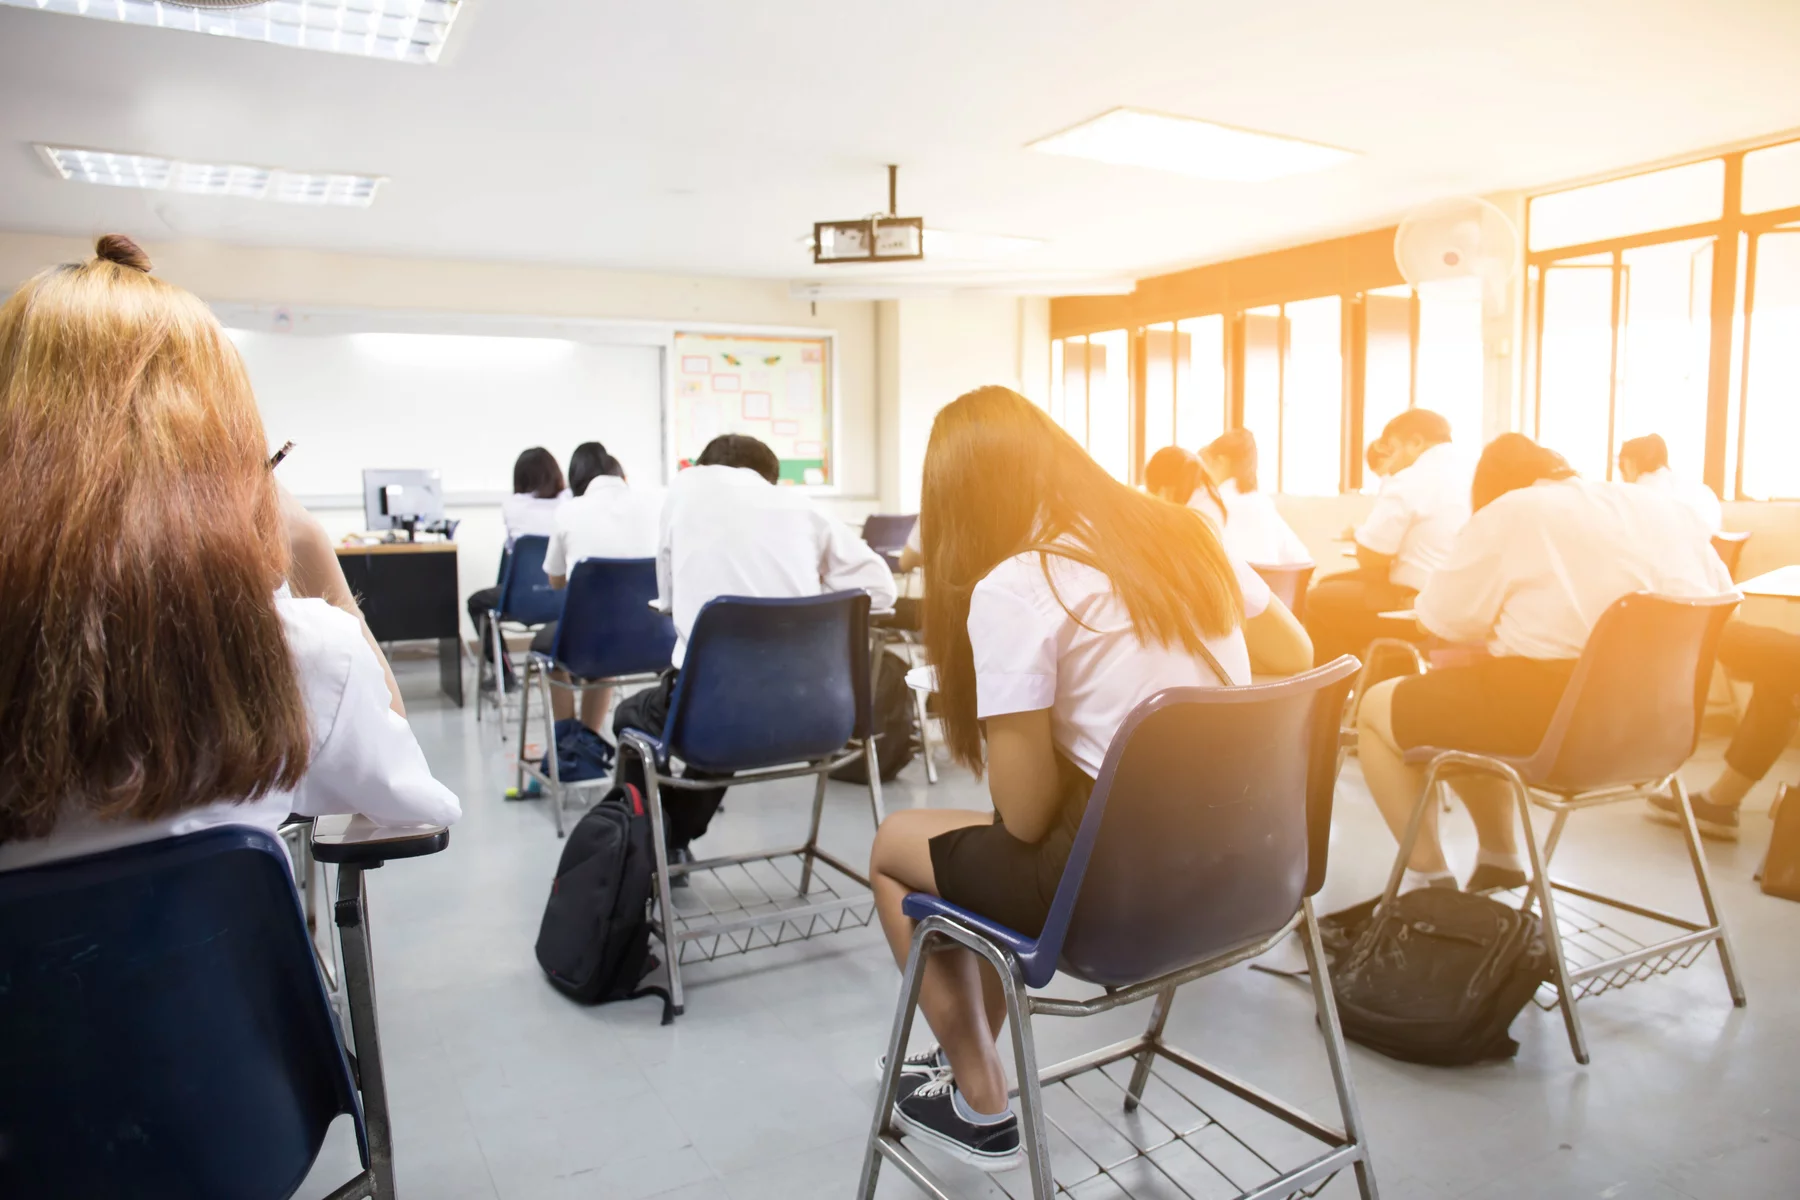 rows of students at desks in class, uk education system